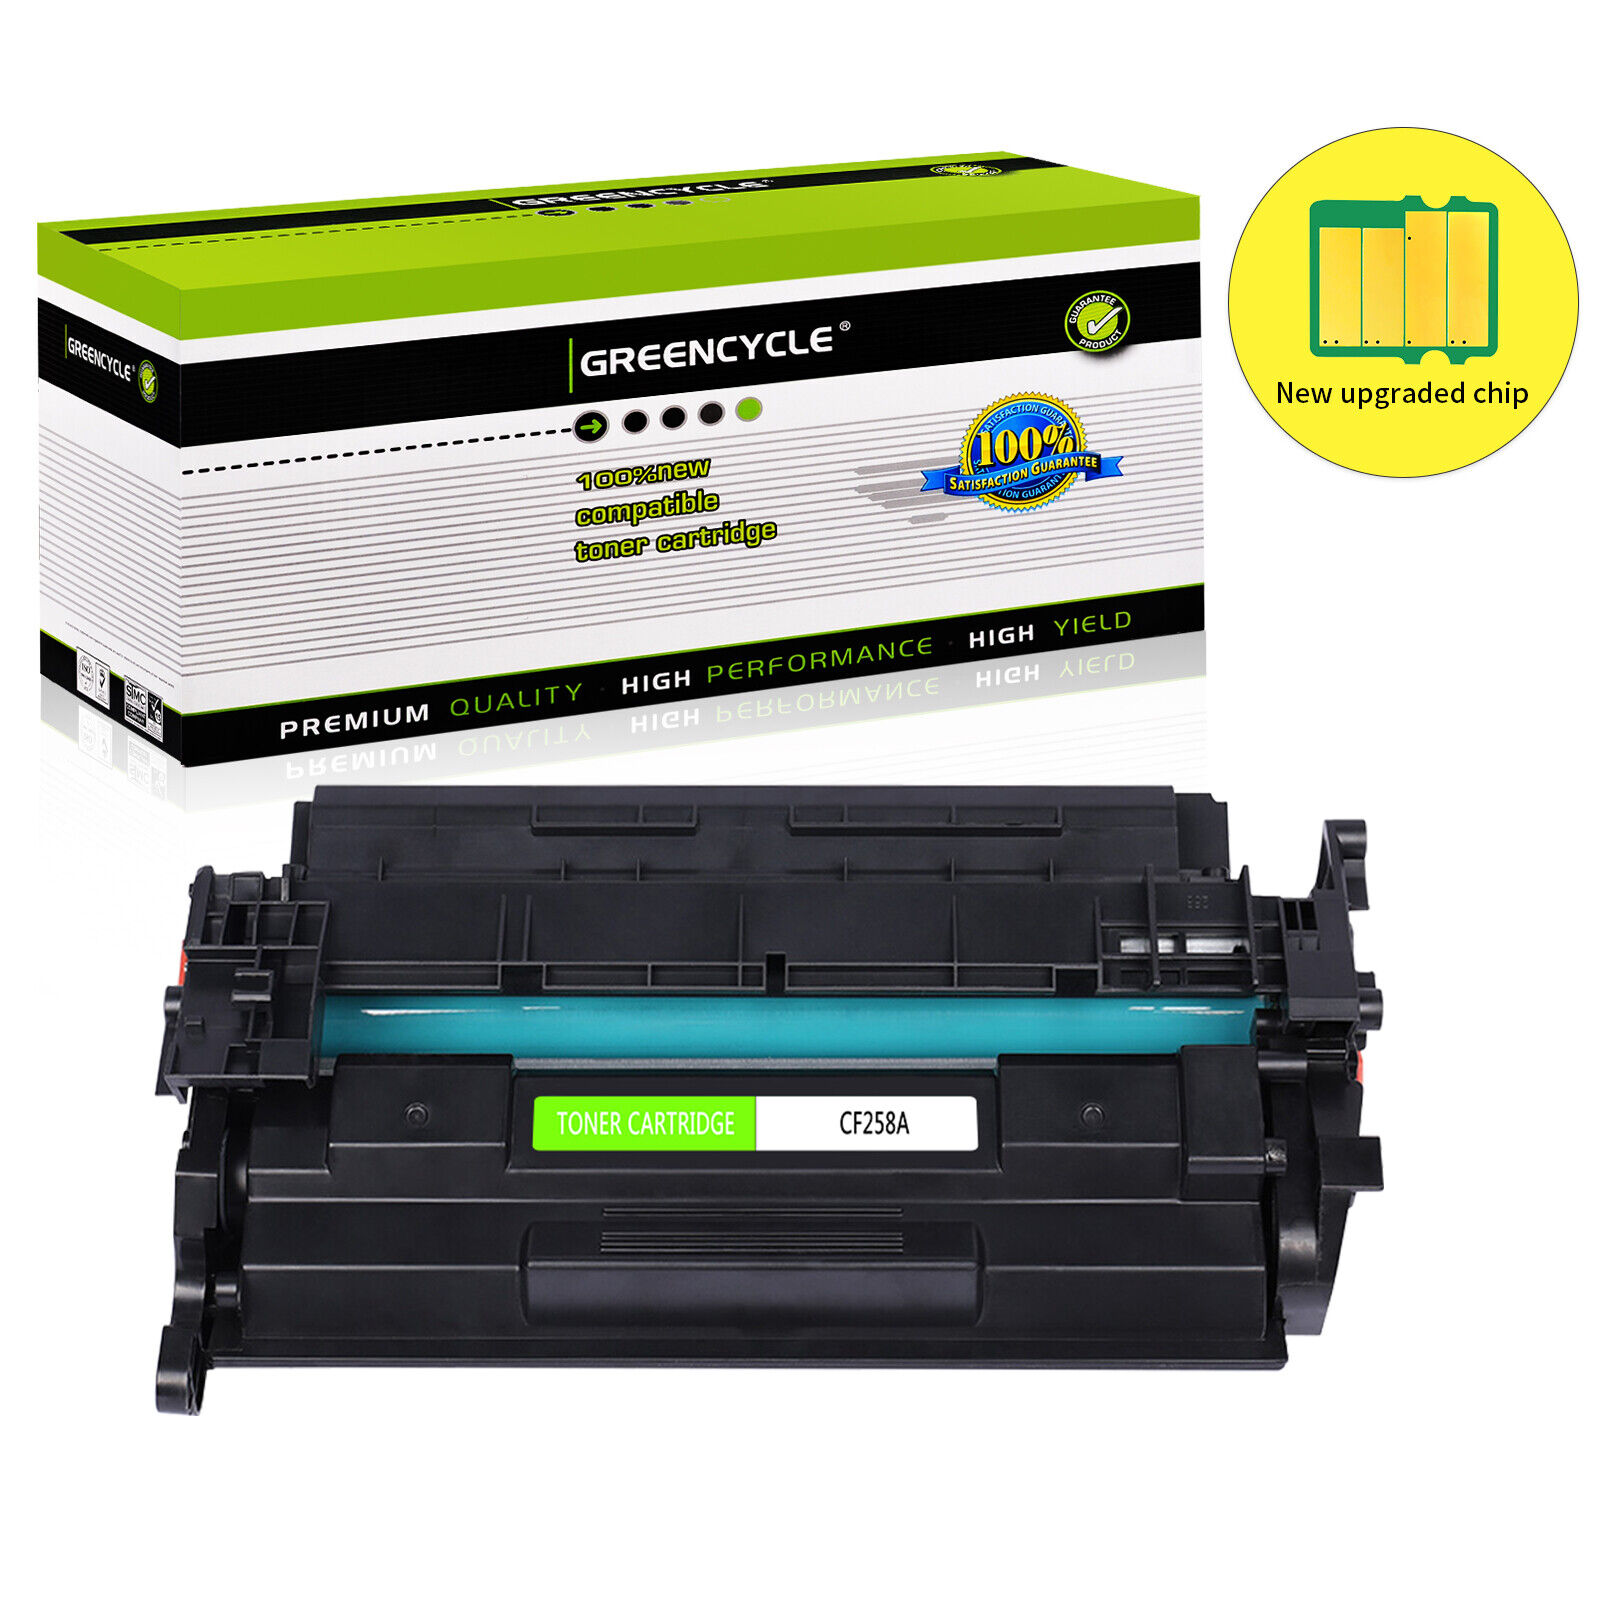 Greencycle CF258A 58A Toner Cartridge with Chip for HP LaserJet Pro M404dn M404